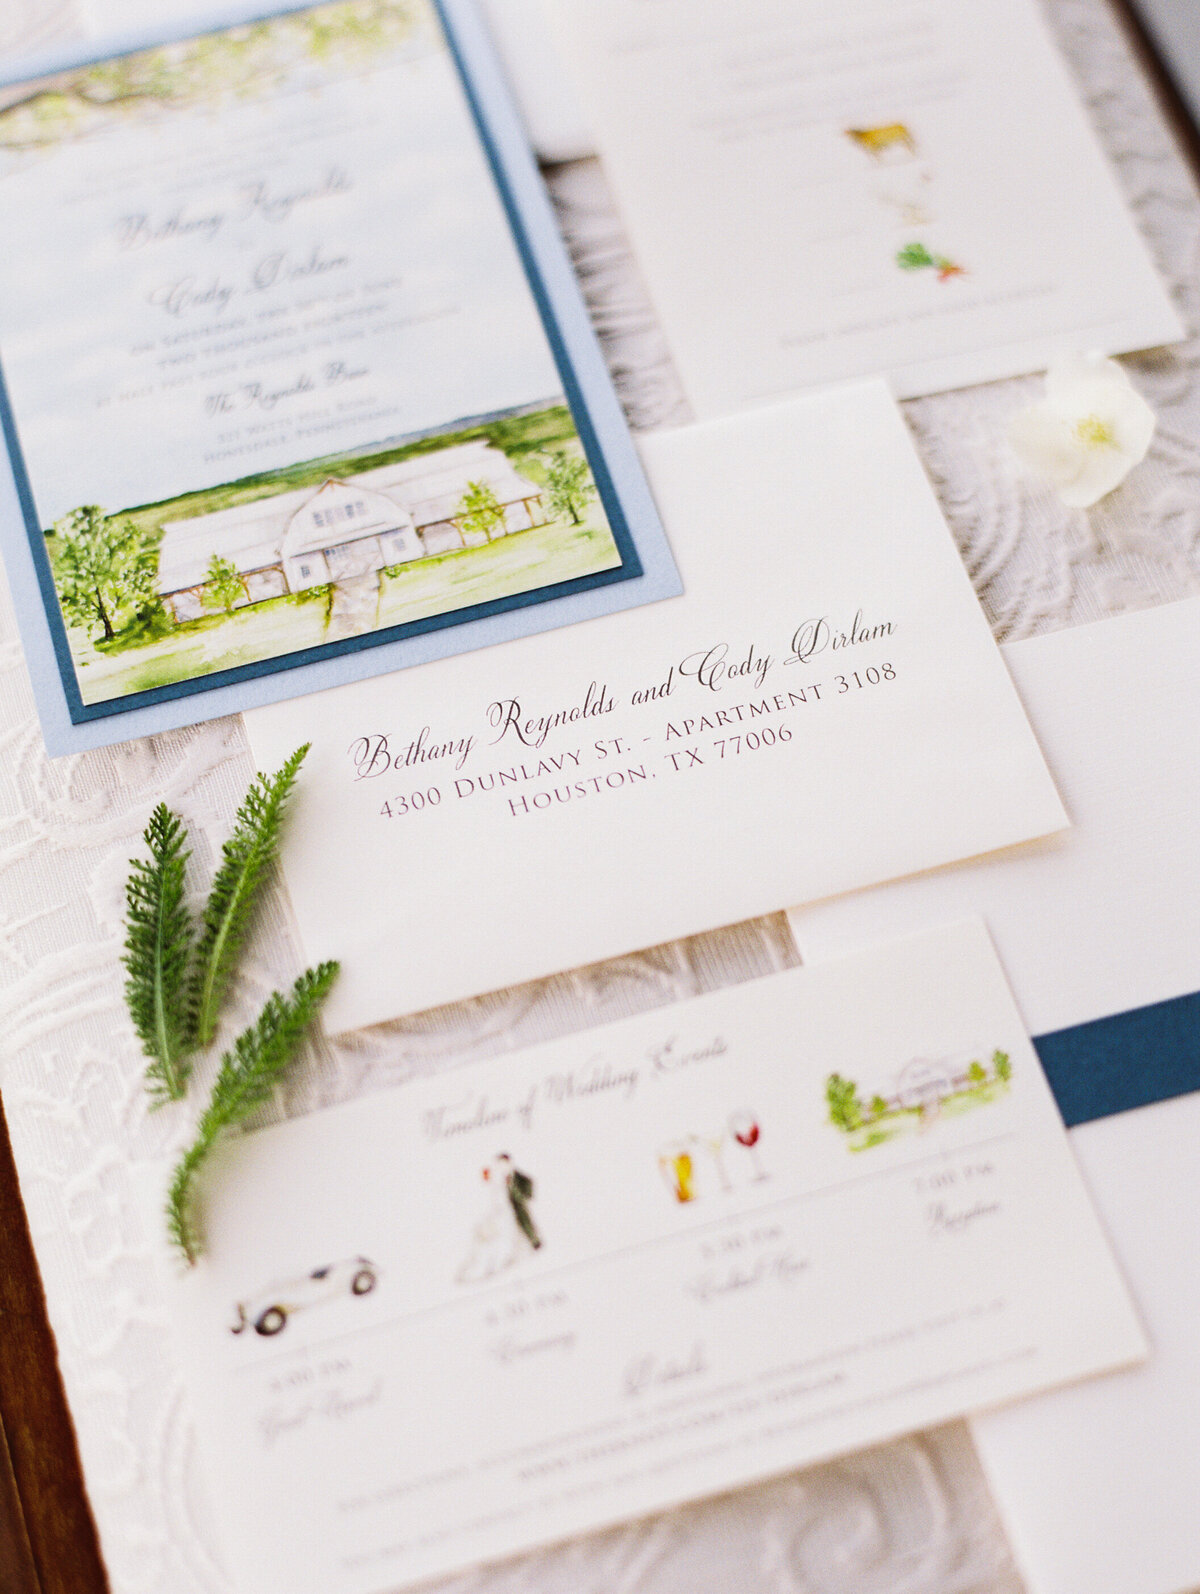 Close-up detail photo of wedding stationery